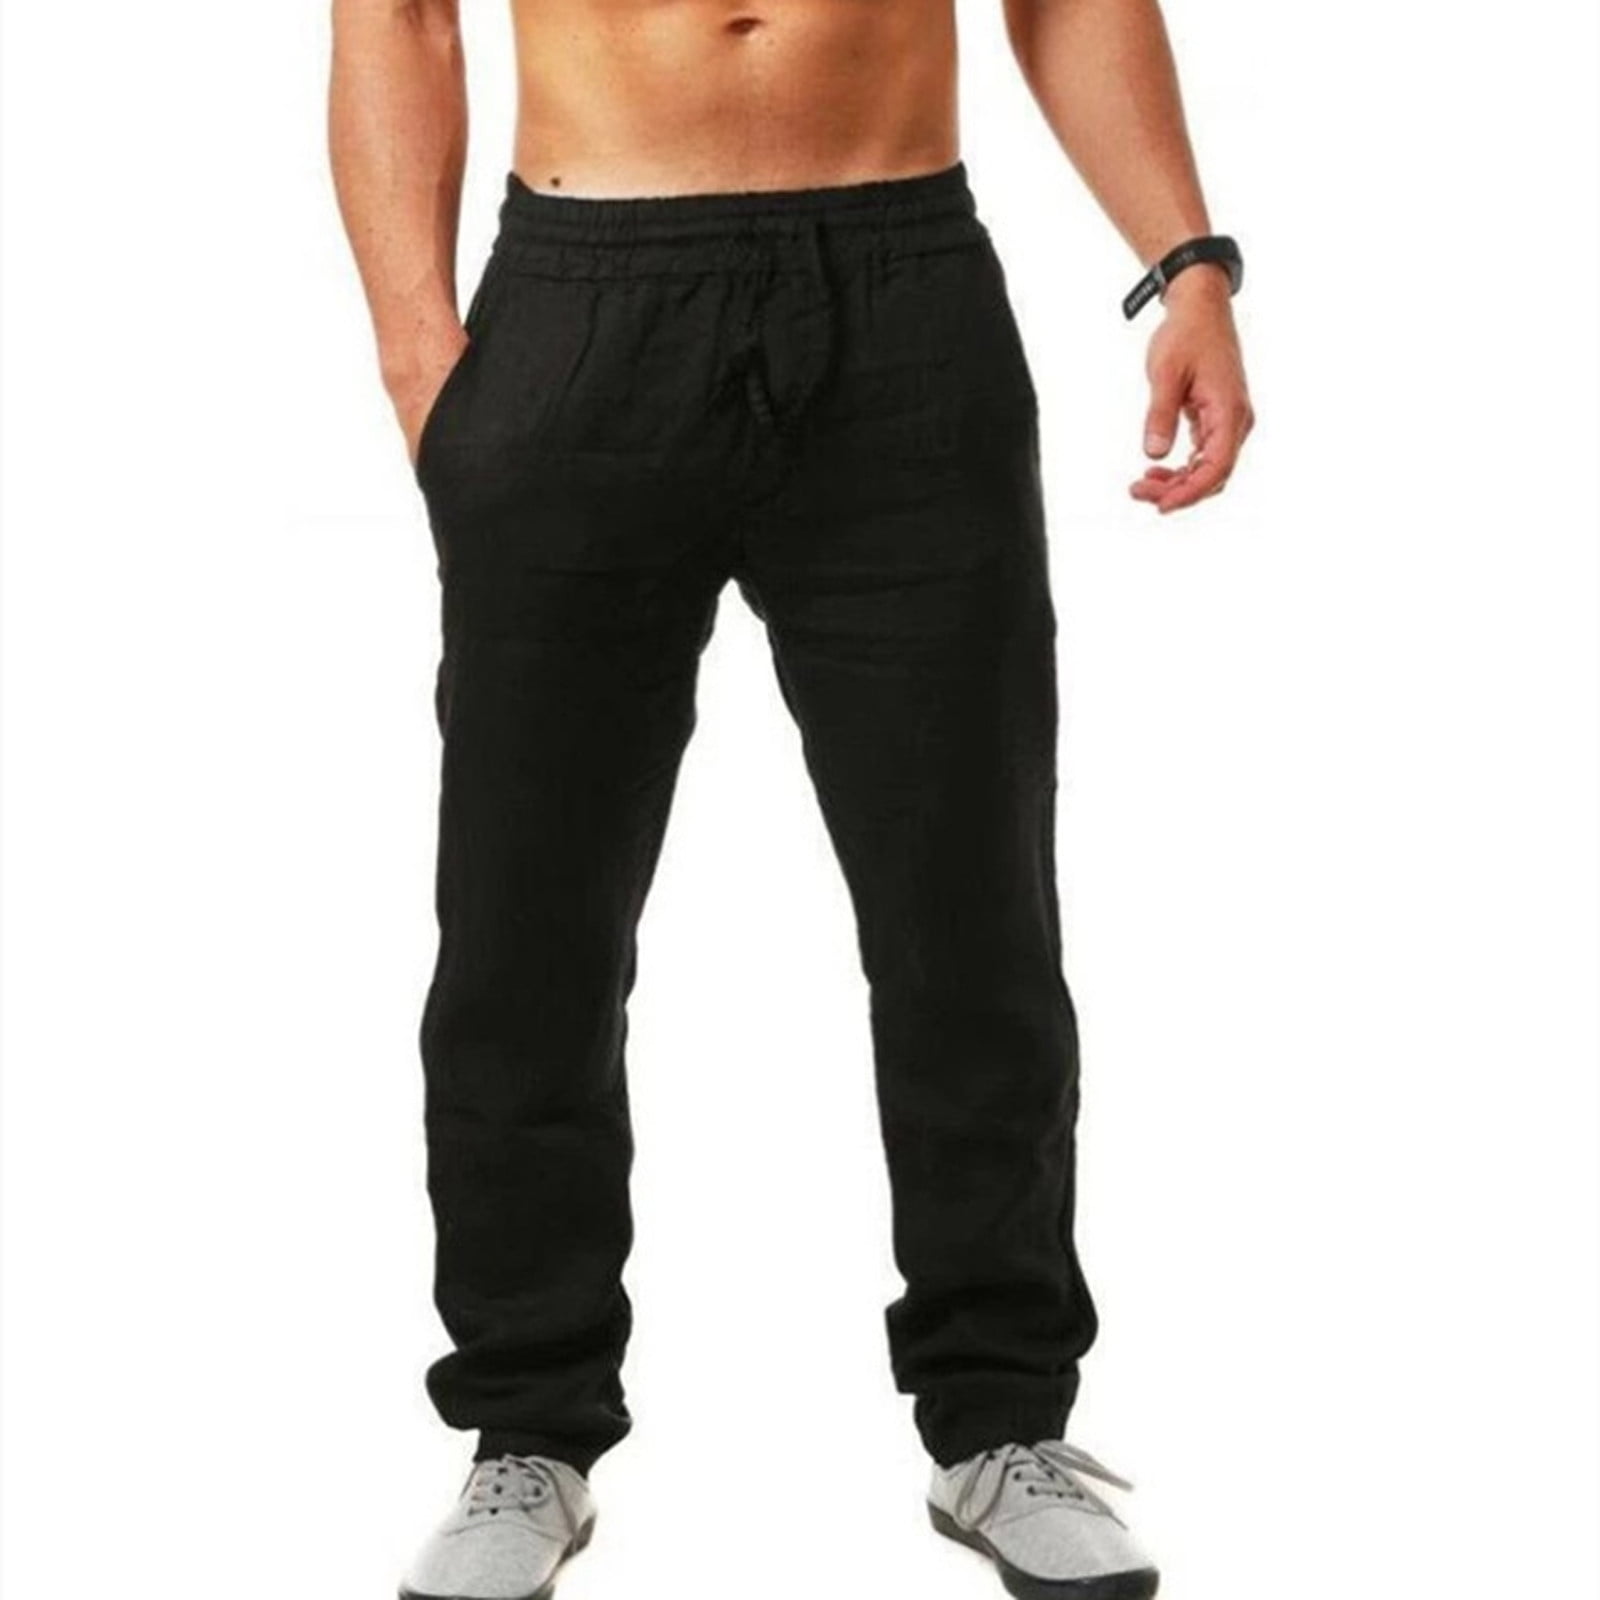 Whlbf Cargo Pants for Men Clearance under $20,Mens and Big Mens Flex ...